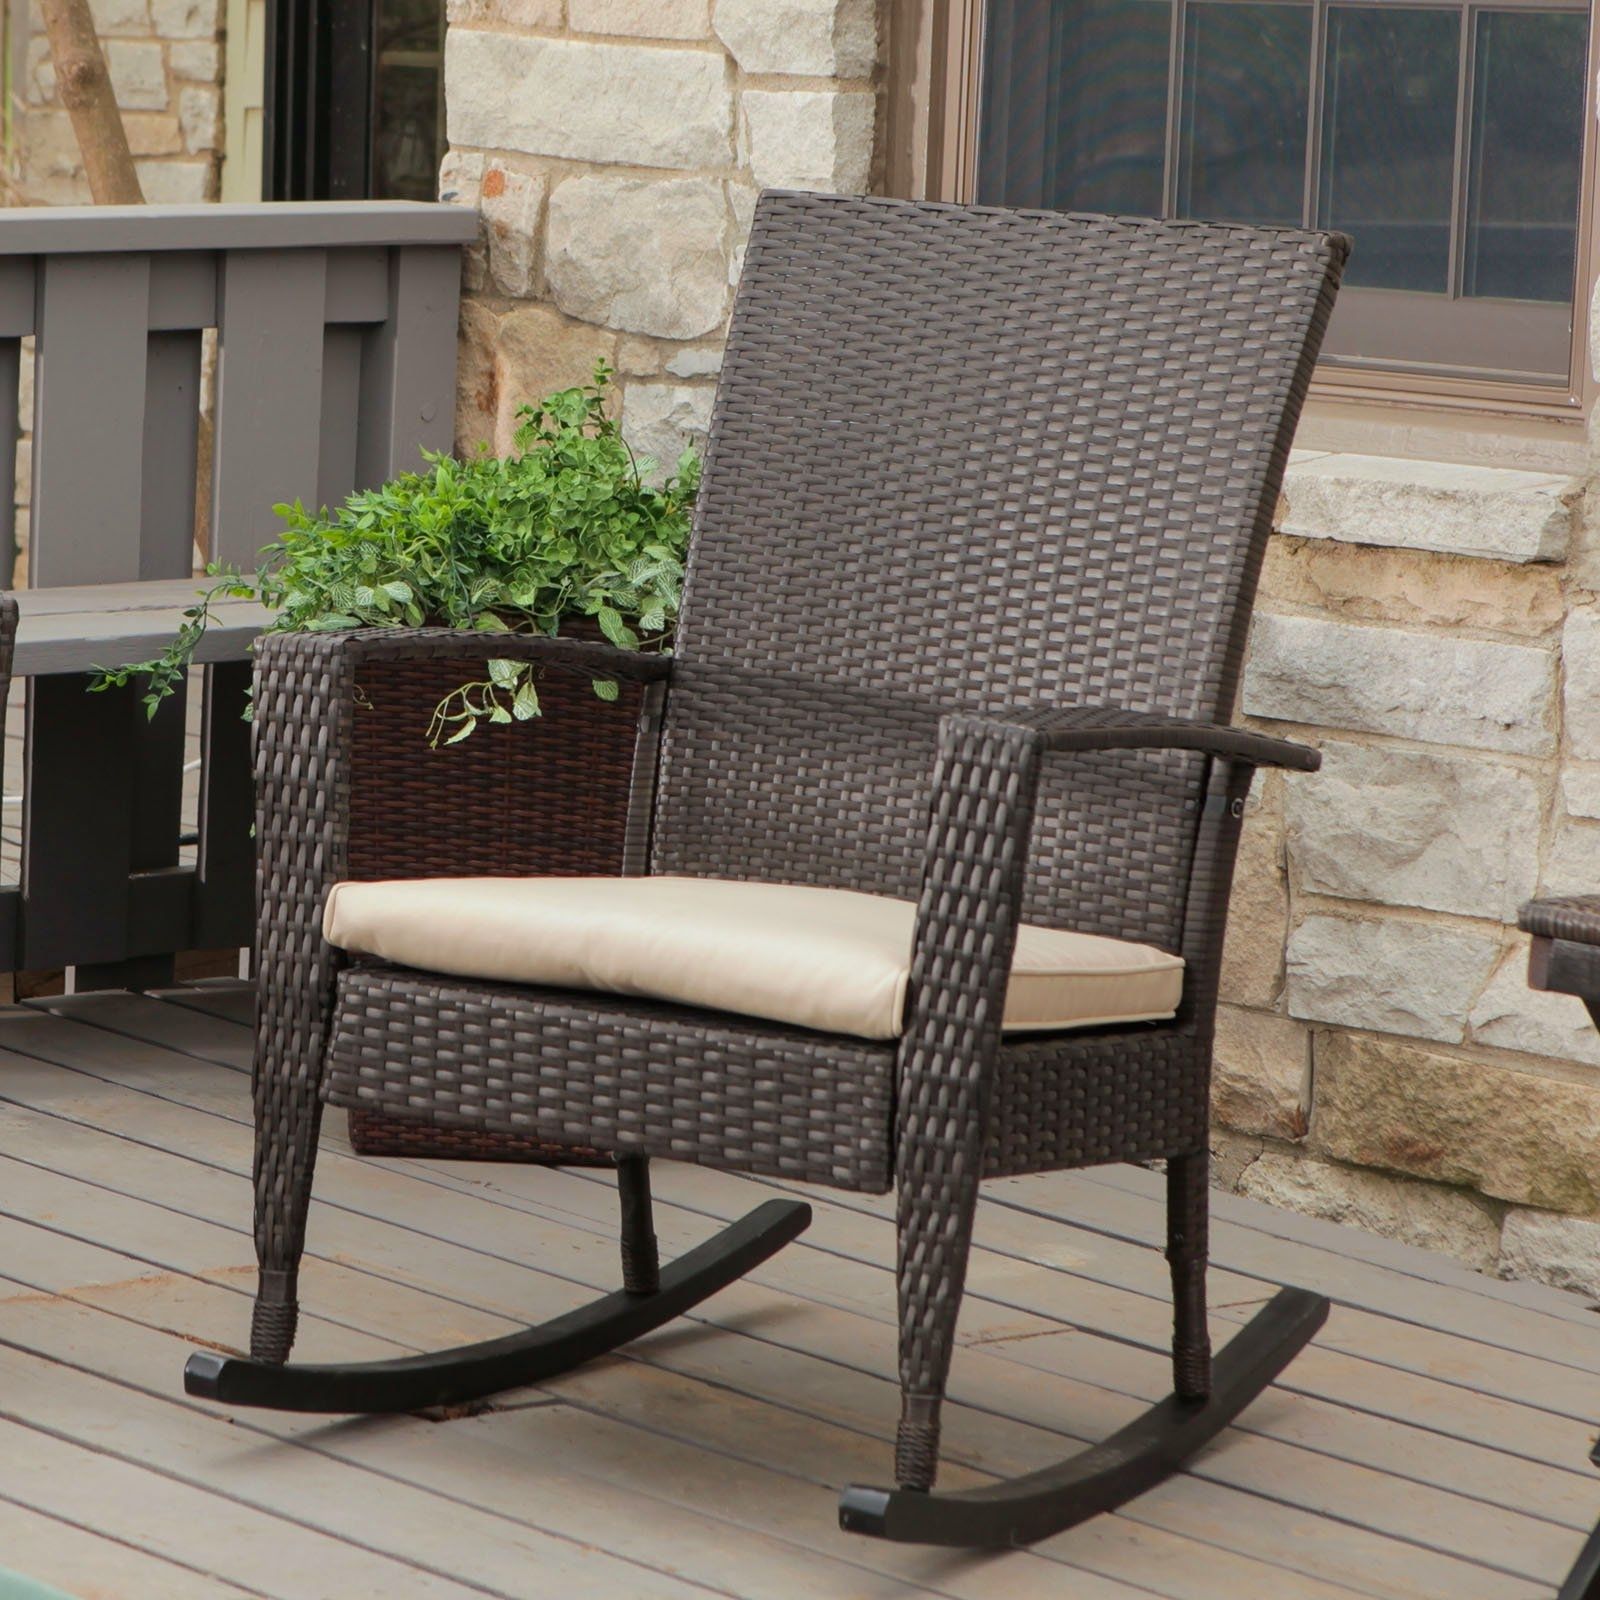 Most Current Outdoor Wicker Rocking Chairs With Cushions Within Furniture Outdoor Wicker Rocking Chairs With Cushions Wood Winning (View 13 of 15)